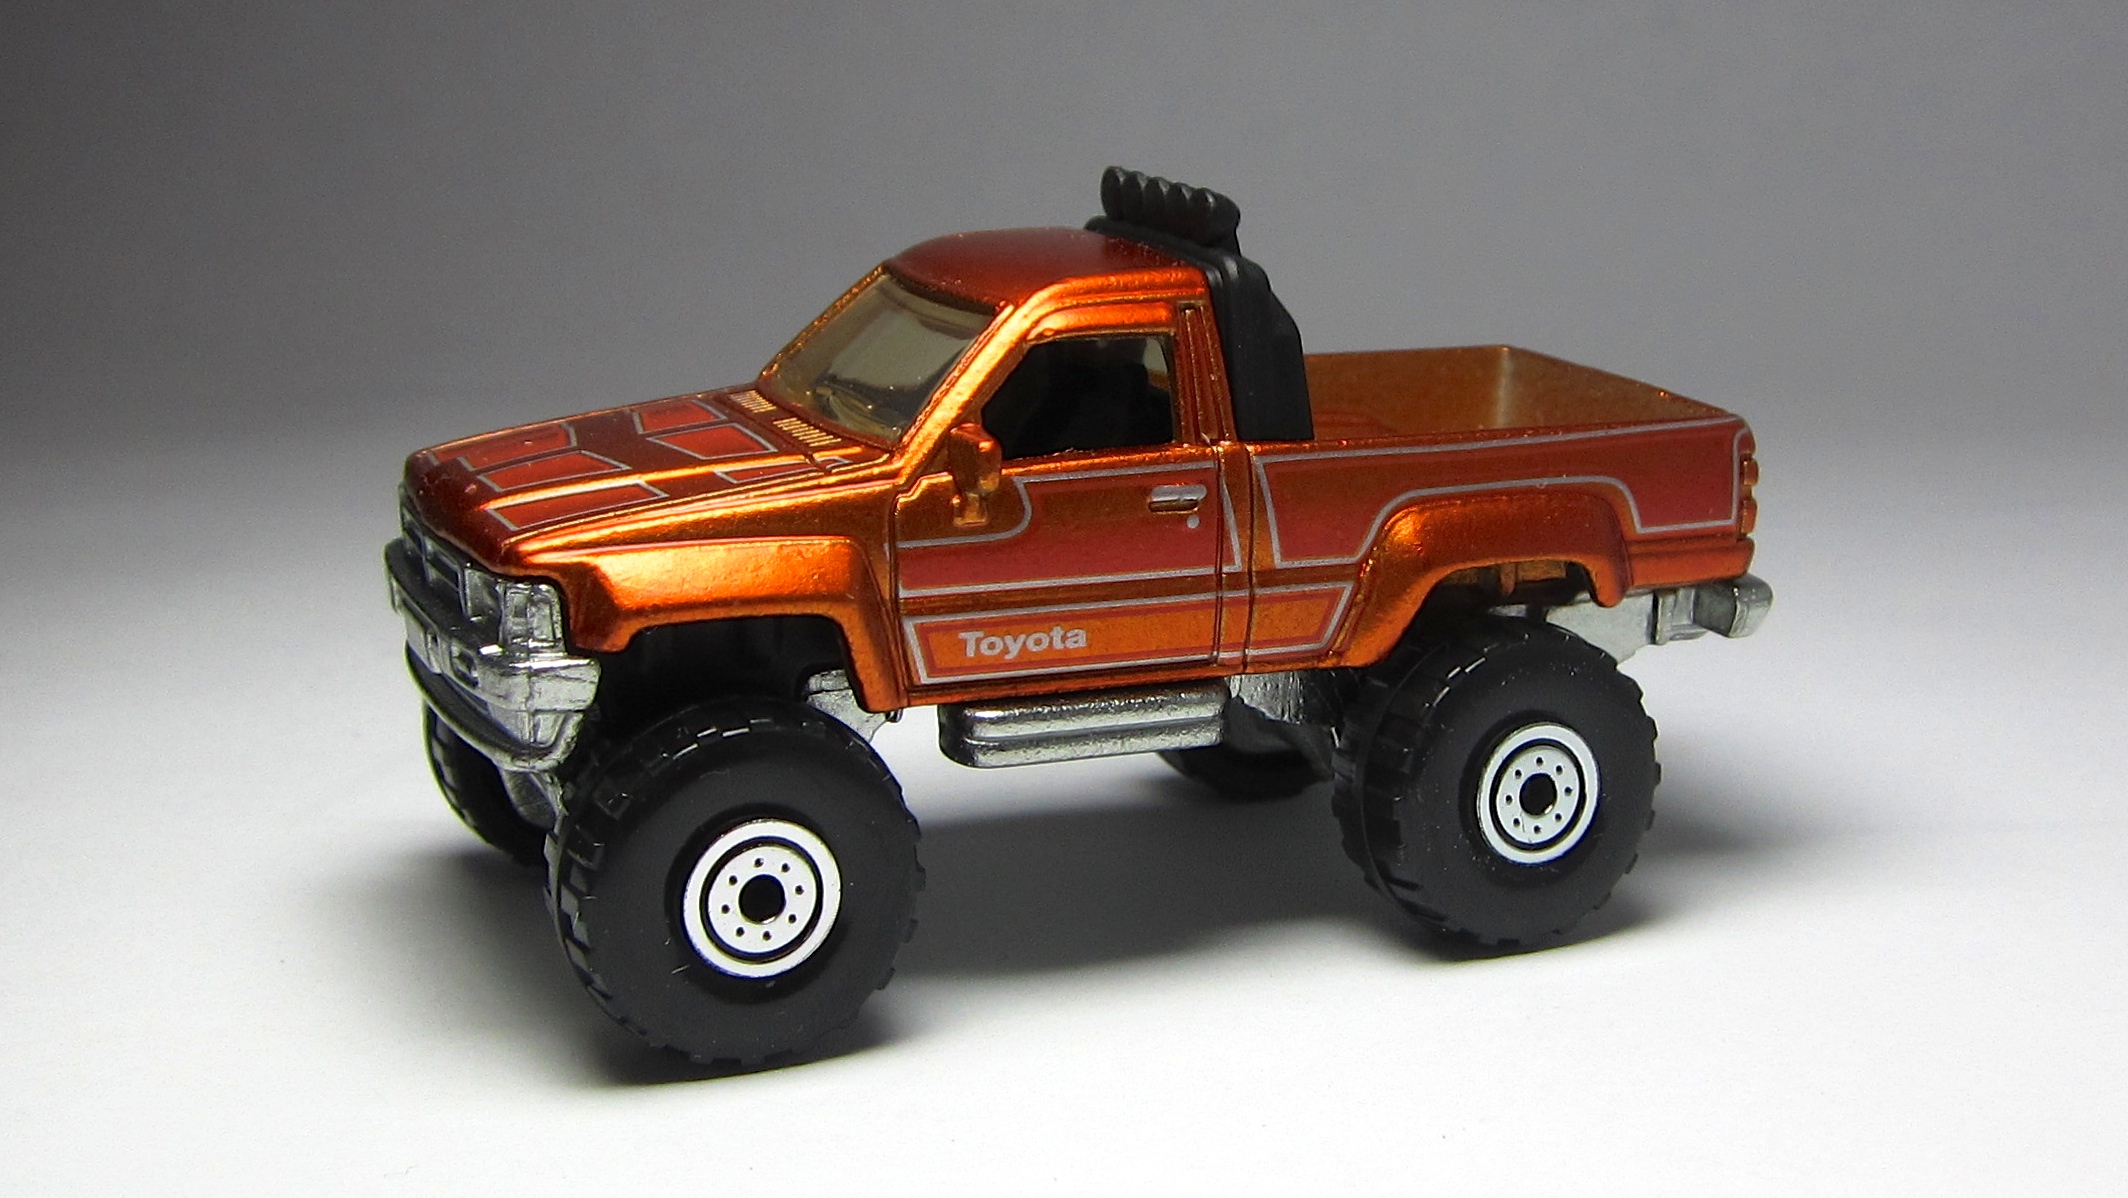 Check out hotwheels pickup truck on ebay. 